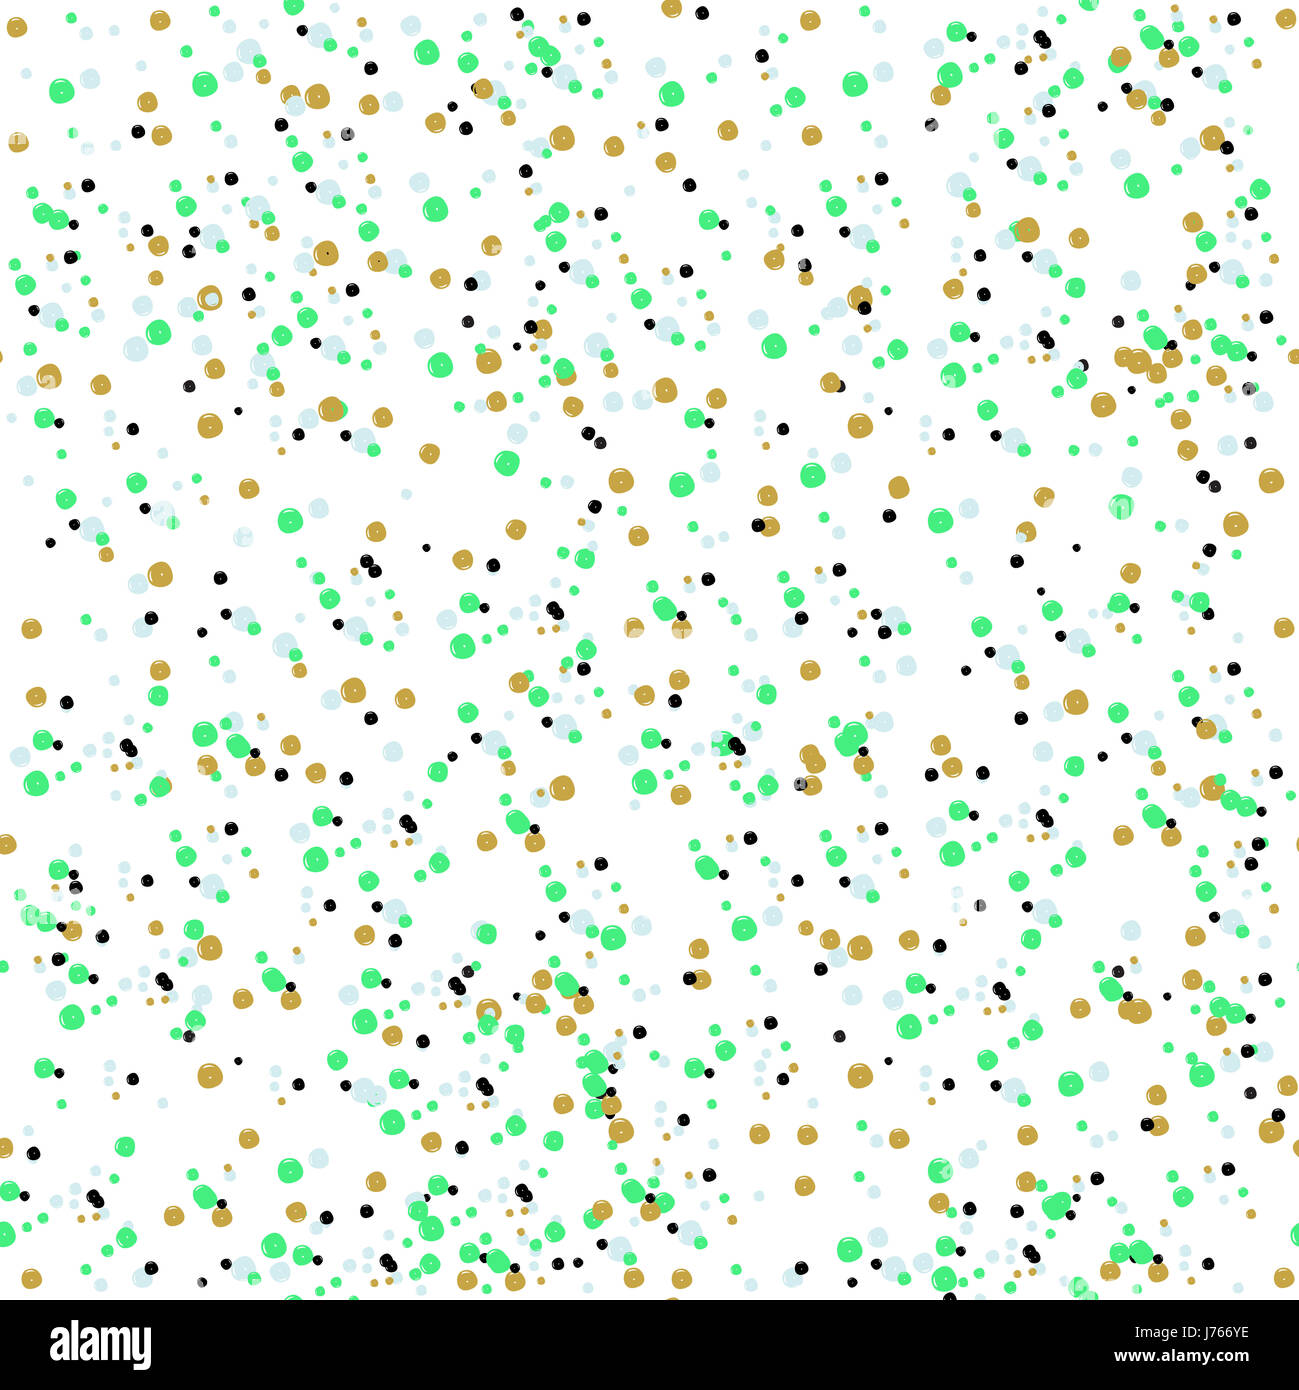 Seamless abstract pattern with colorful dots Stock Photo